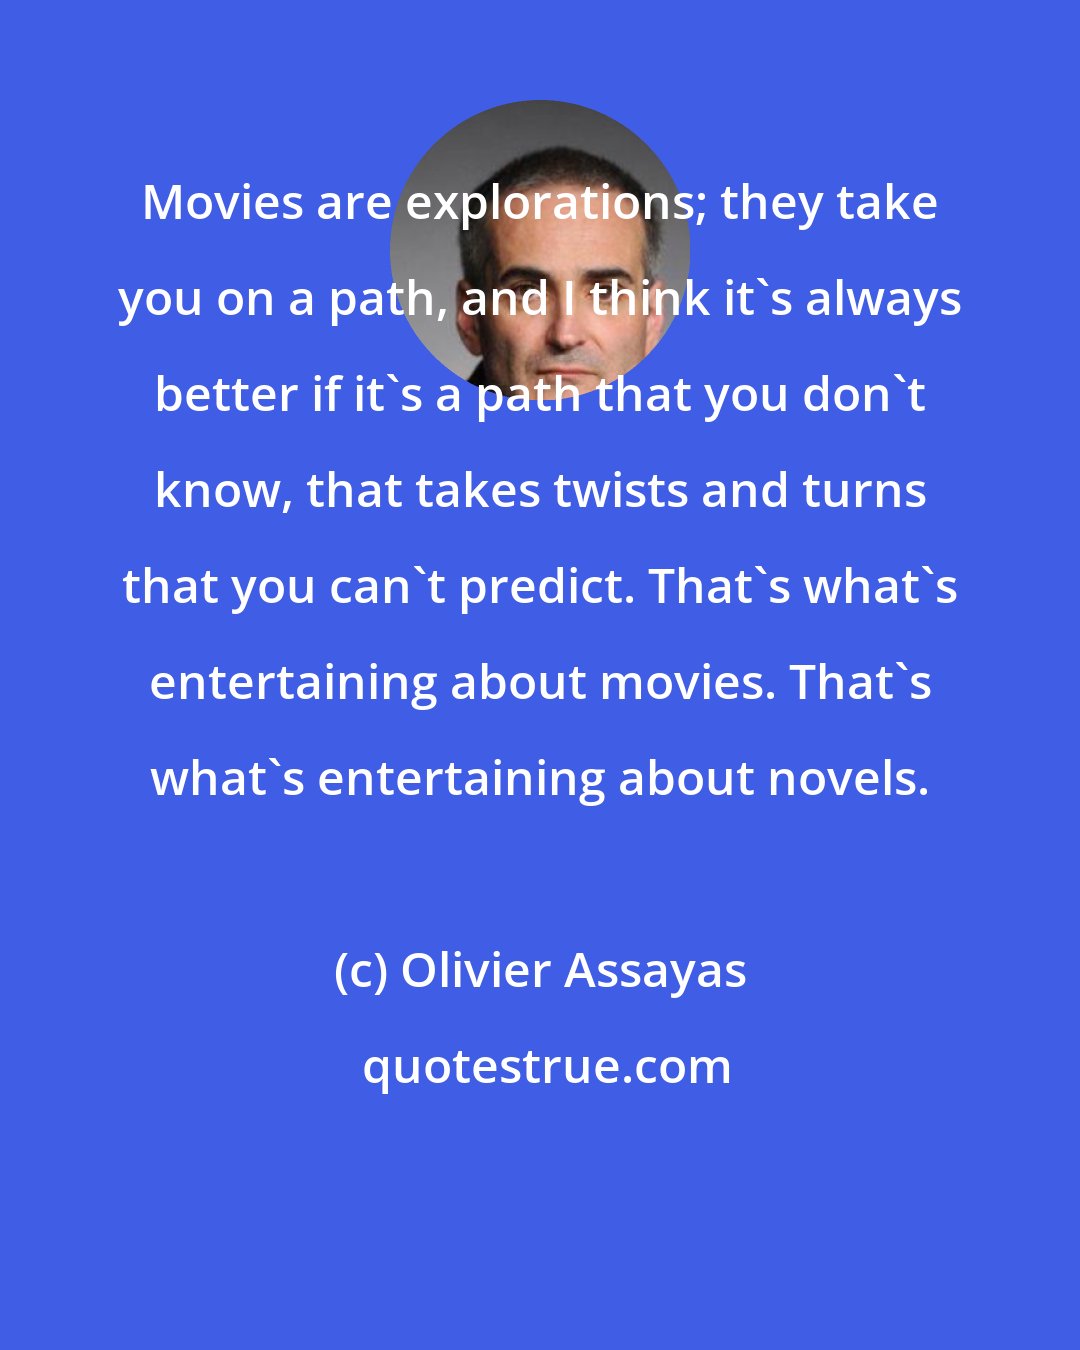 Olivier Assayas: Movies are explorations; they take you on a path, and I think it's always better if it's a path that you don't know, that takes twists and turns that you can't predict. That's what's entertaining about movies. That's what's entertaining about novels.